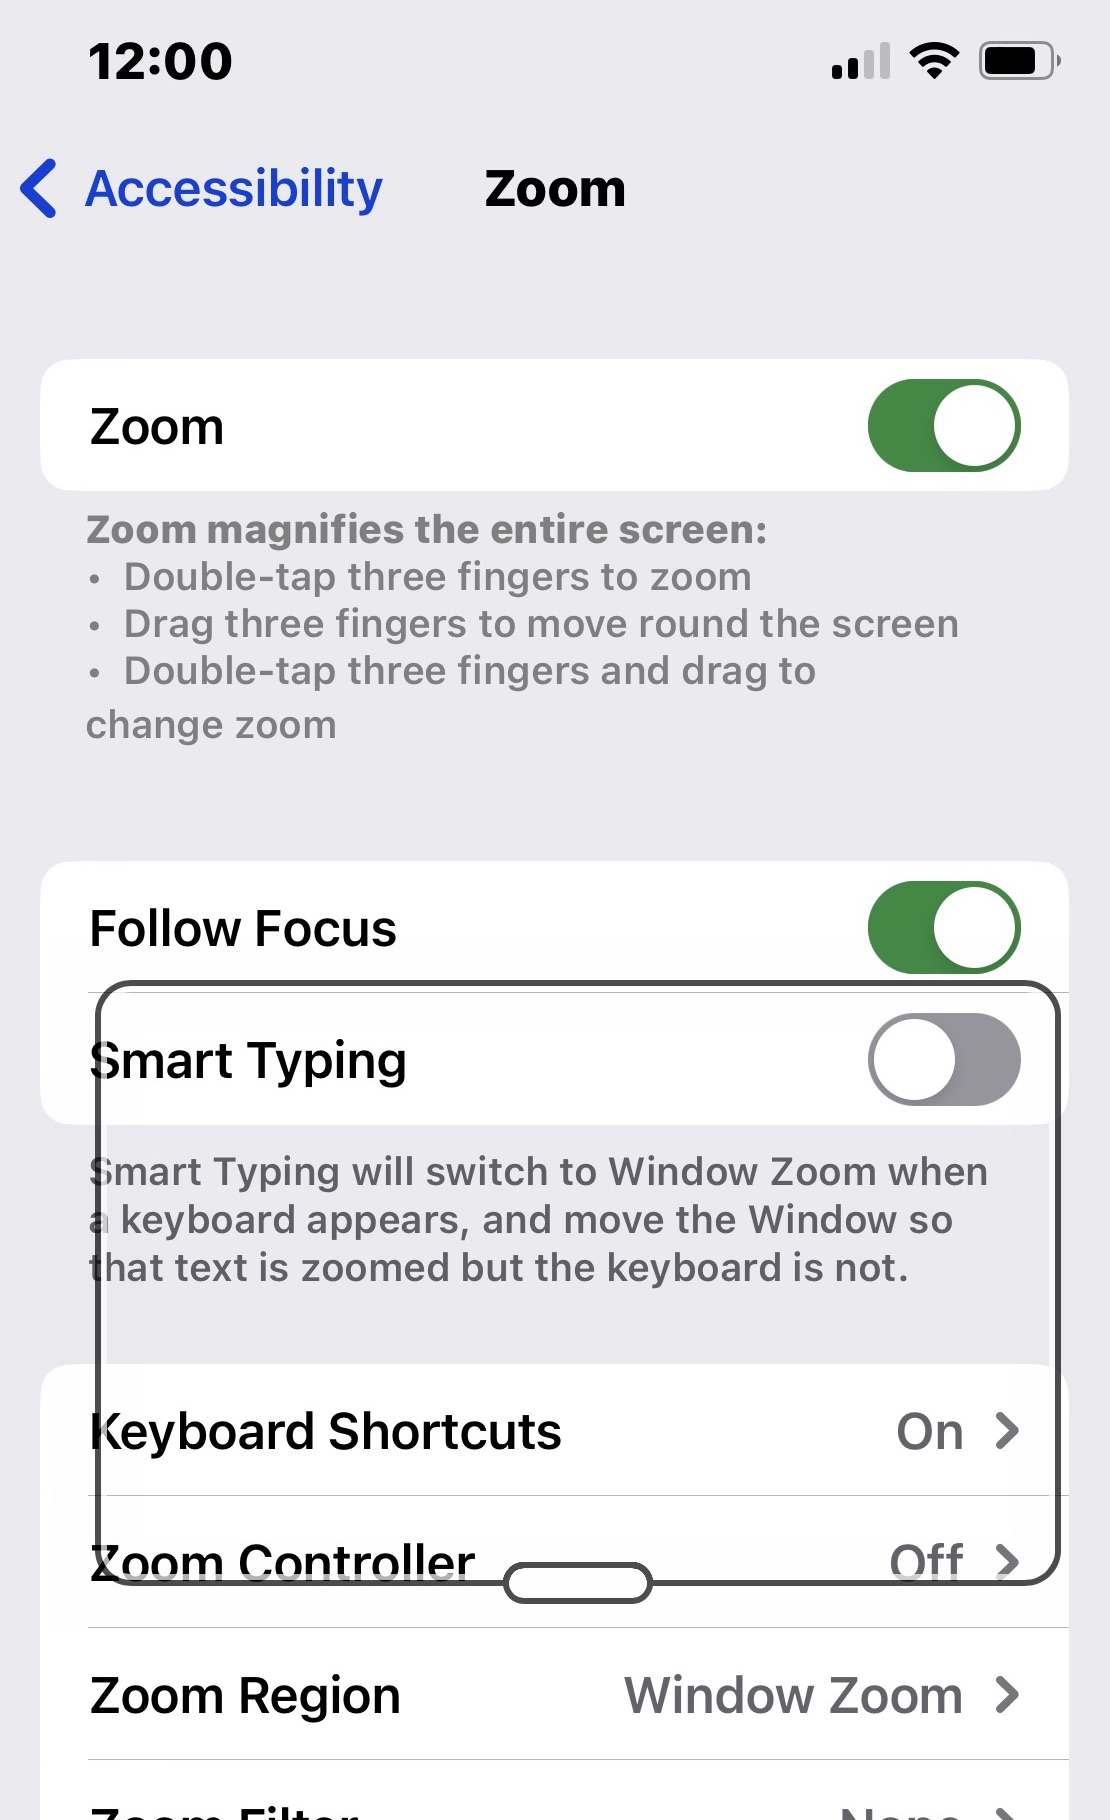 iphone accessibility zoom function enabled